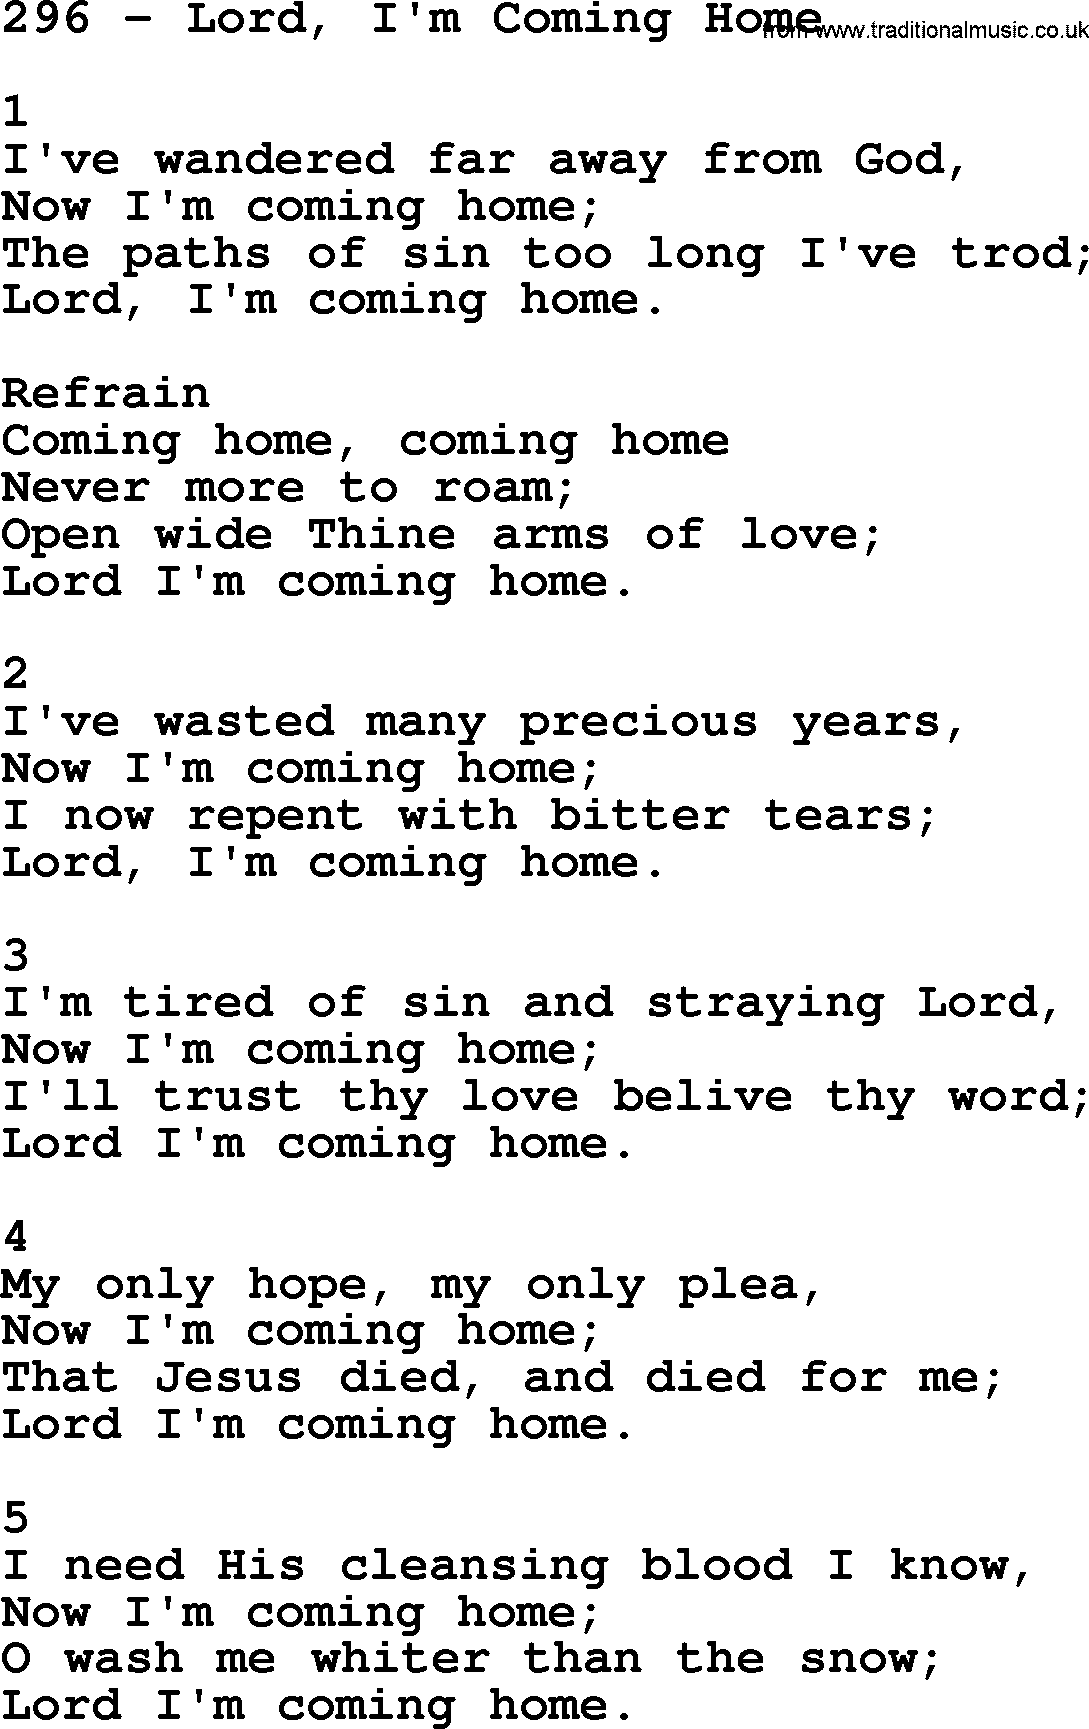 Complete Adventis Hymnal, title: 296-Lord, I'm Coming Home, with lyrics, midi, mp3, powerpoints(PPT) and PDF,